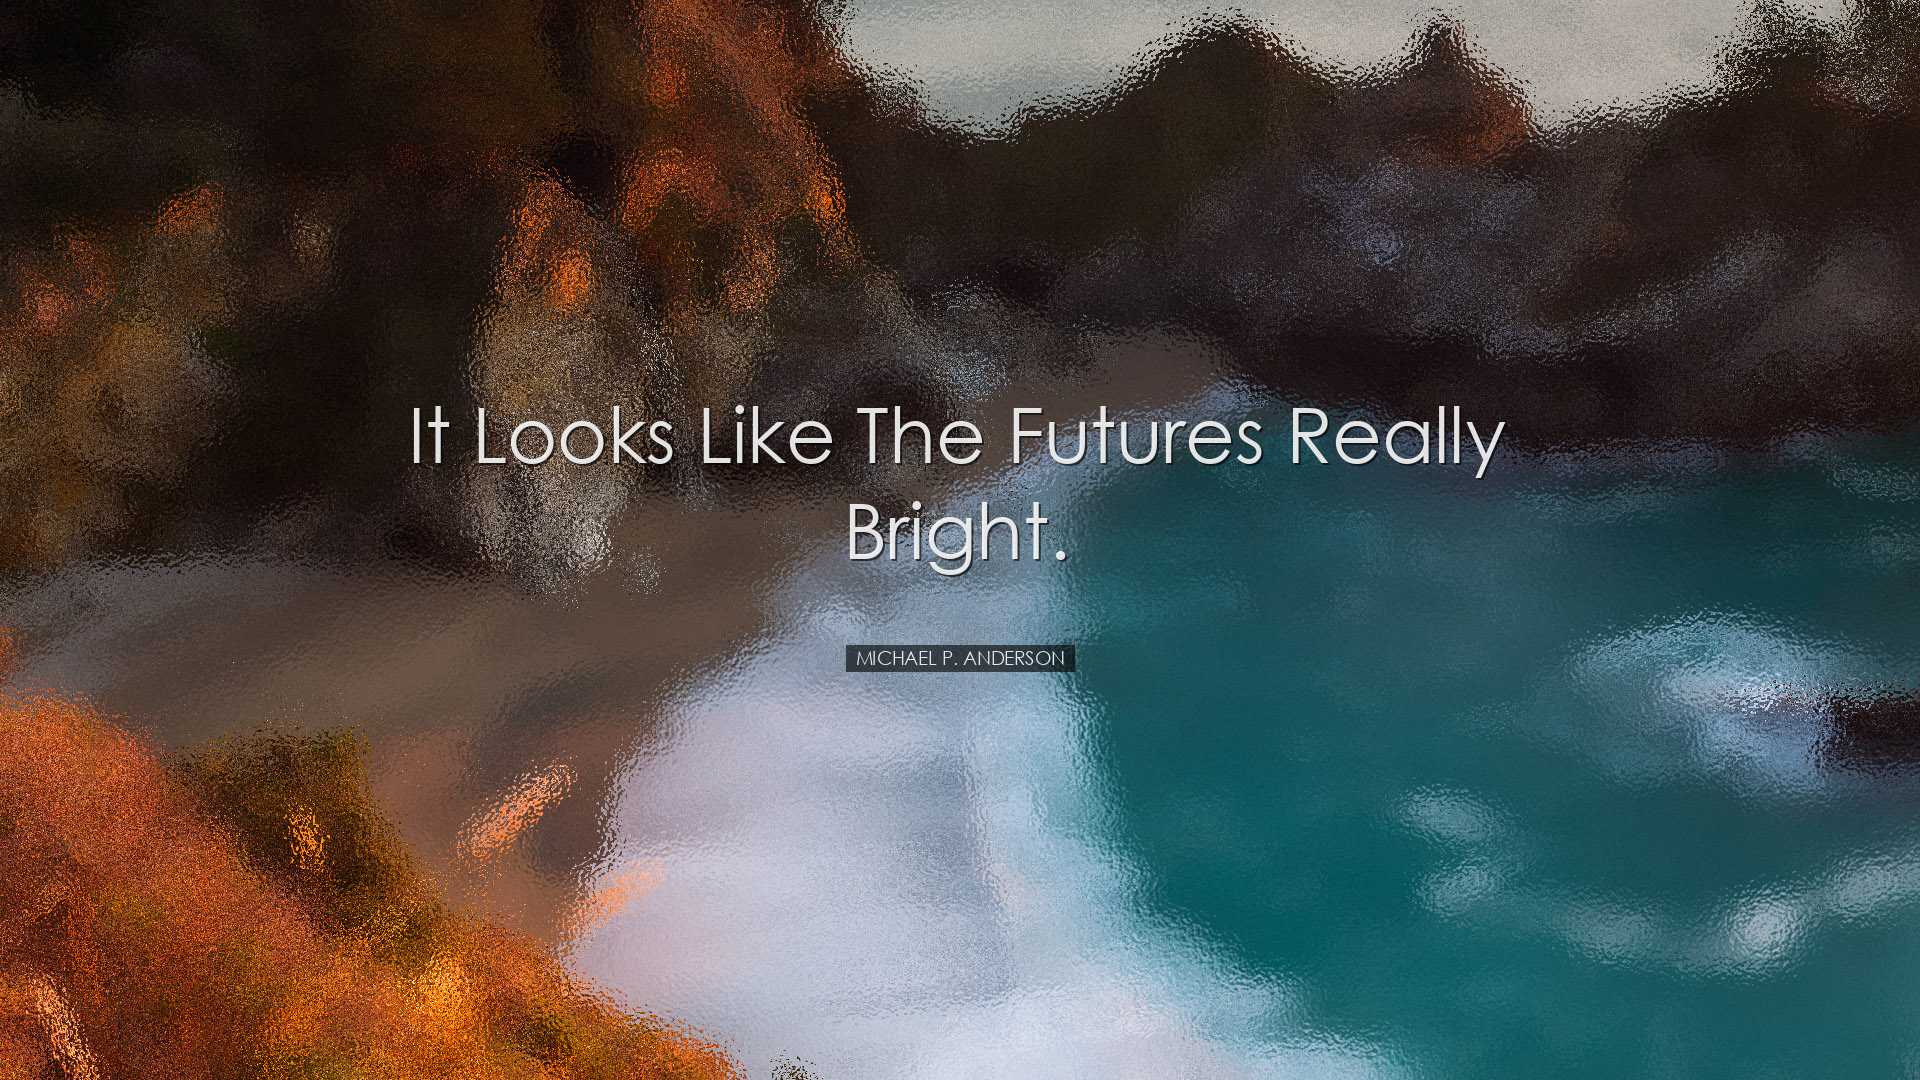 It looks like the futures really bright. - Michael P. Anderson